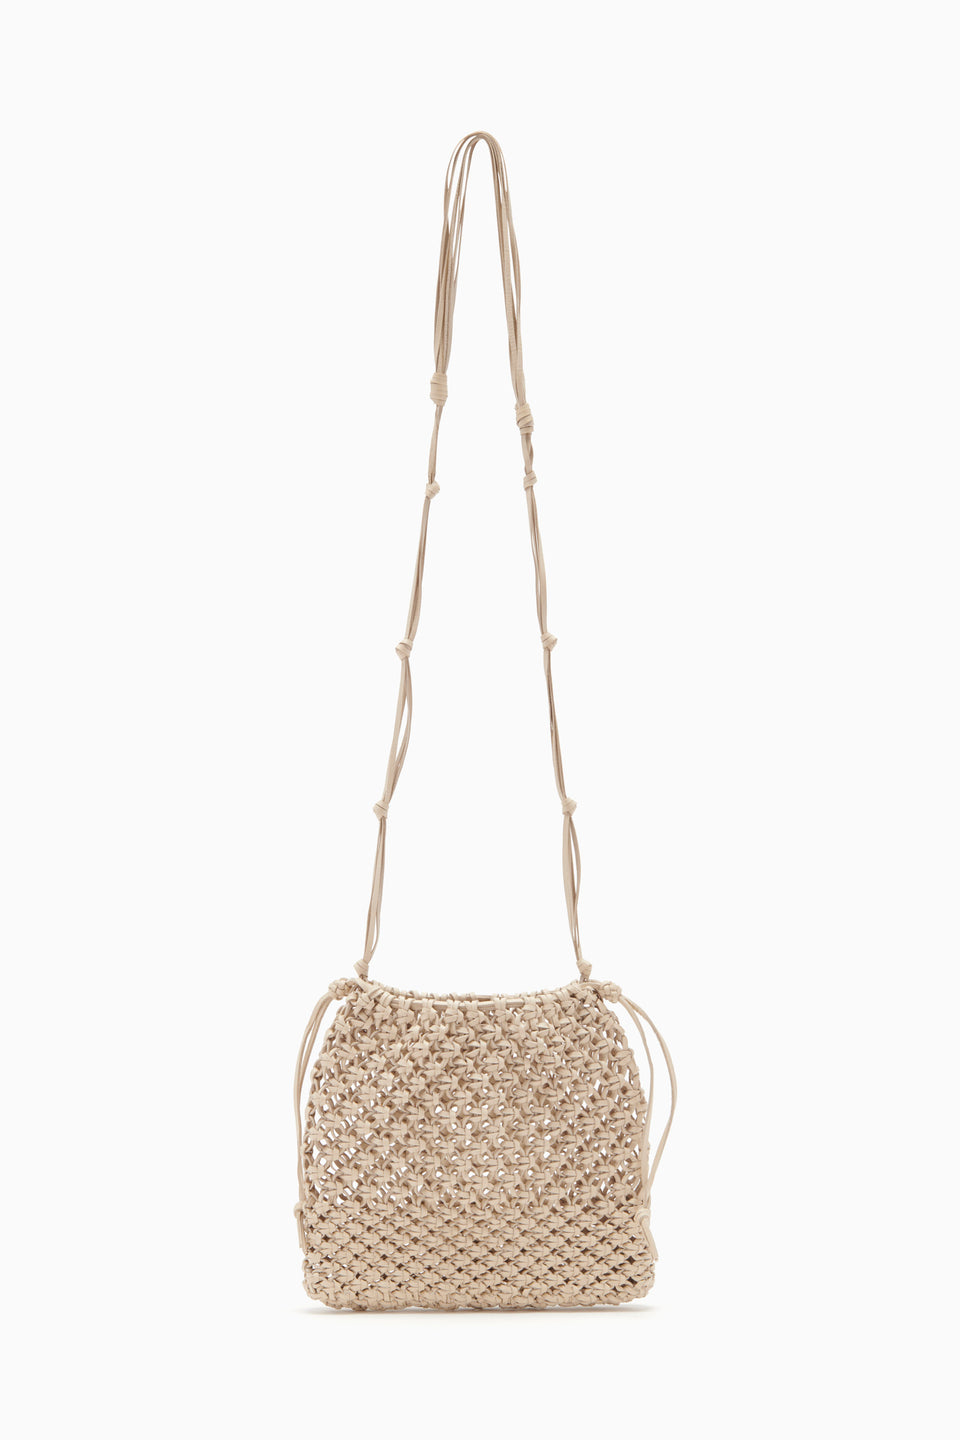 Tulia Knotted Crossbody - Alabaster